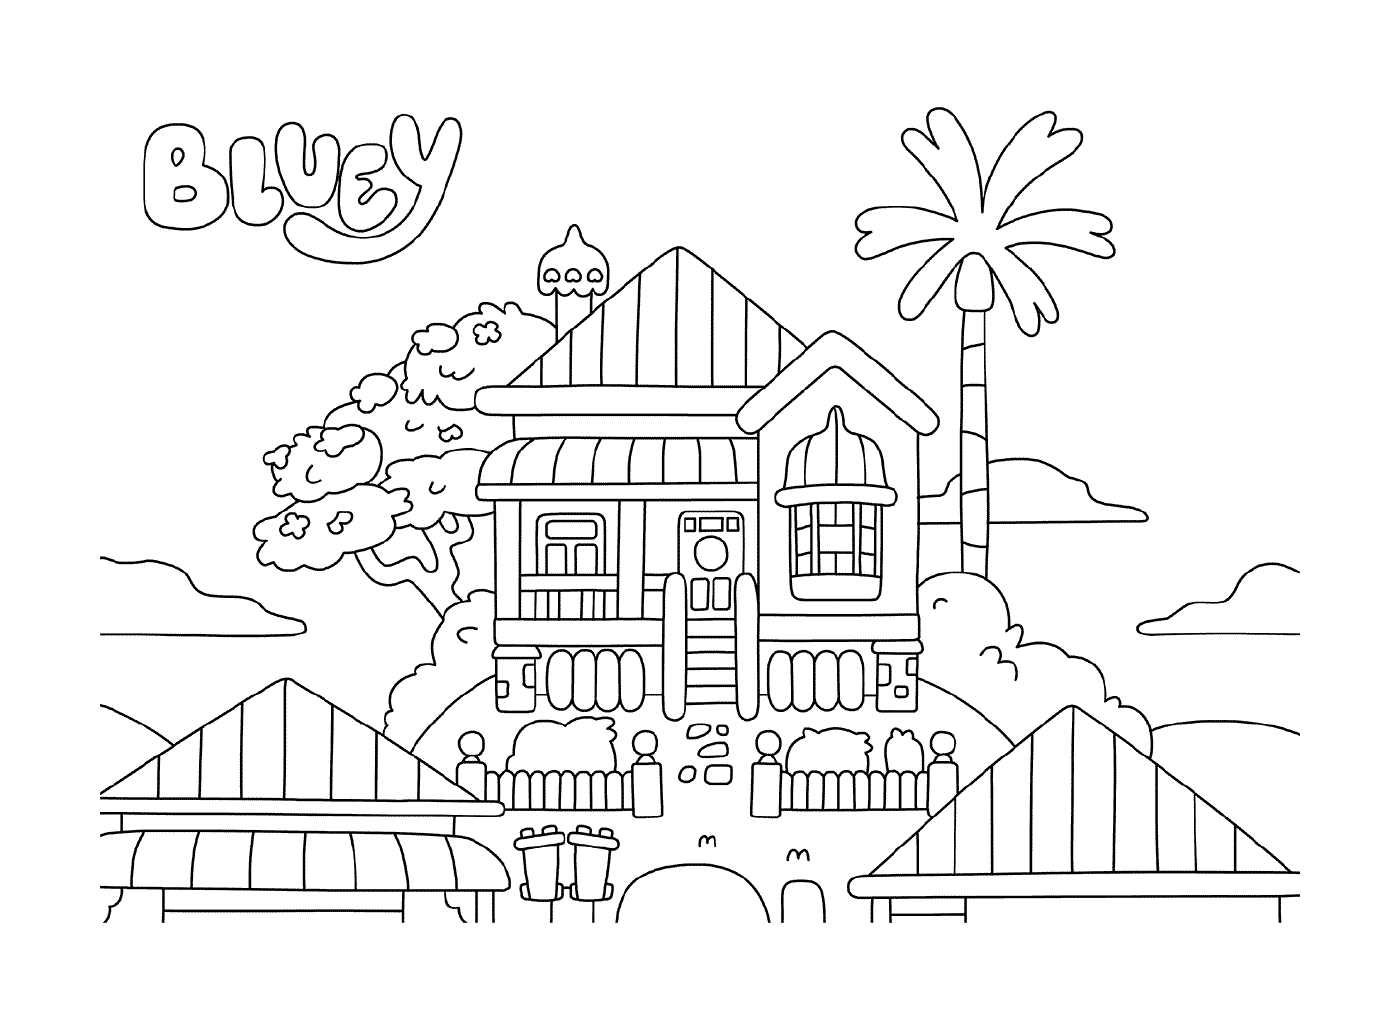  A house with a palm tree in the background 